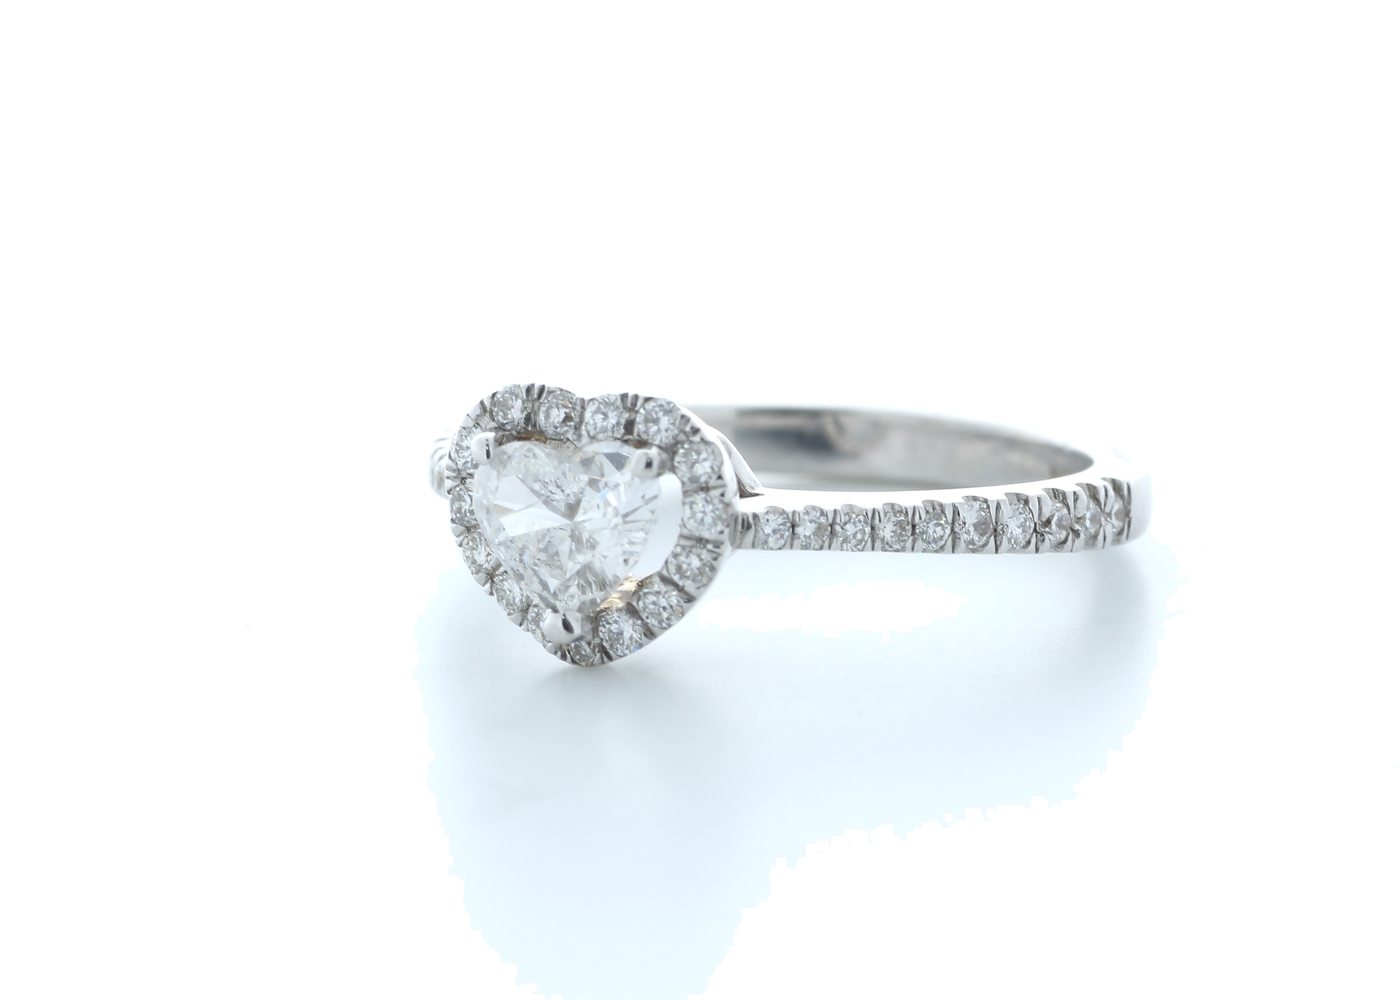 18ct White Gold Heart Shape Diamond With Halo Setting Ring 0.77 (0.45) Carats - Image 2 of 5